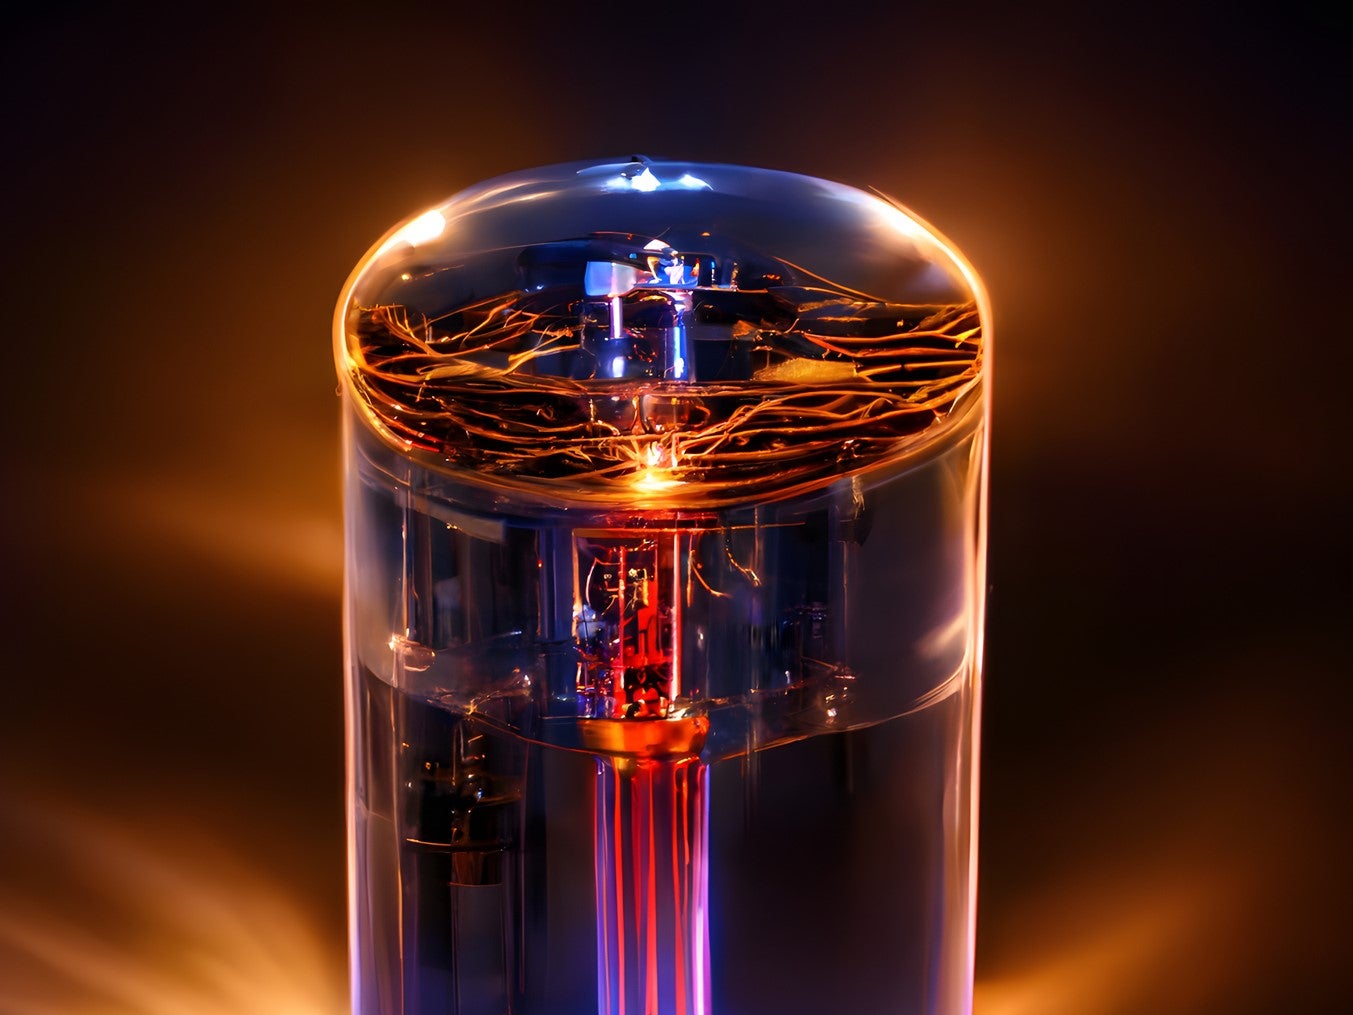 Quantum batteries hold the potential to transform energy storage